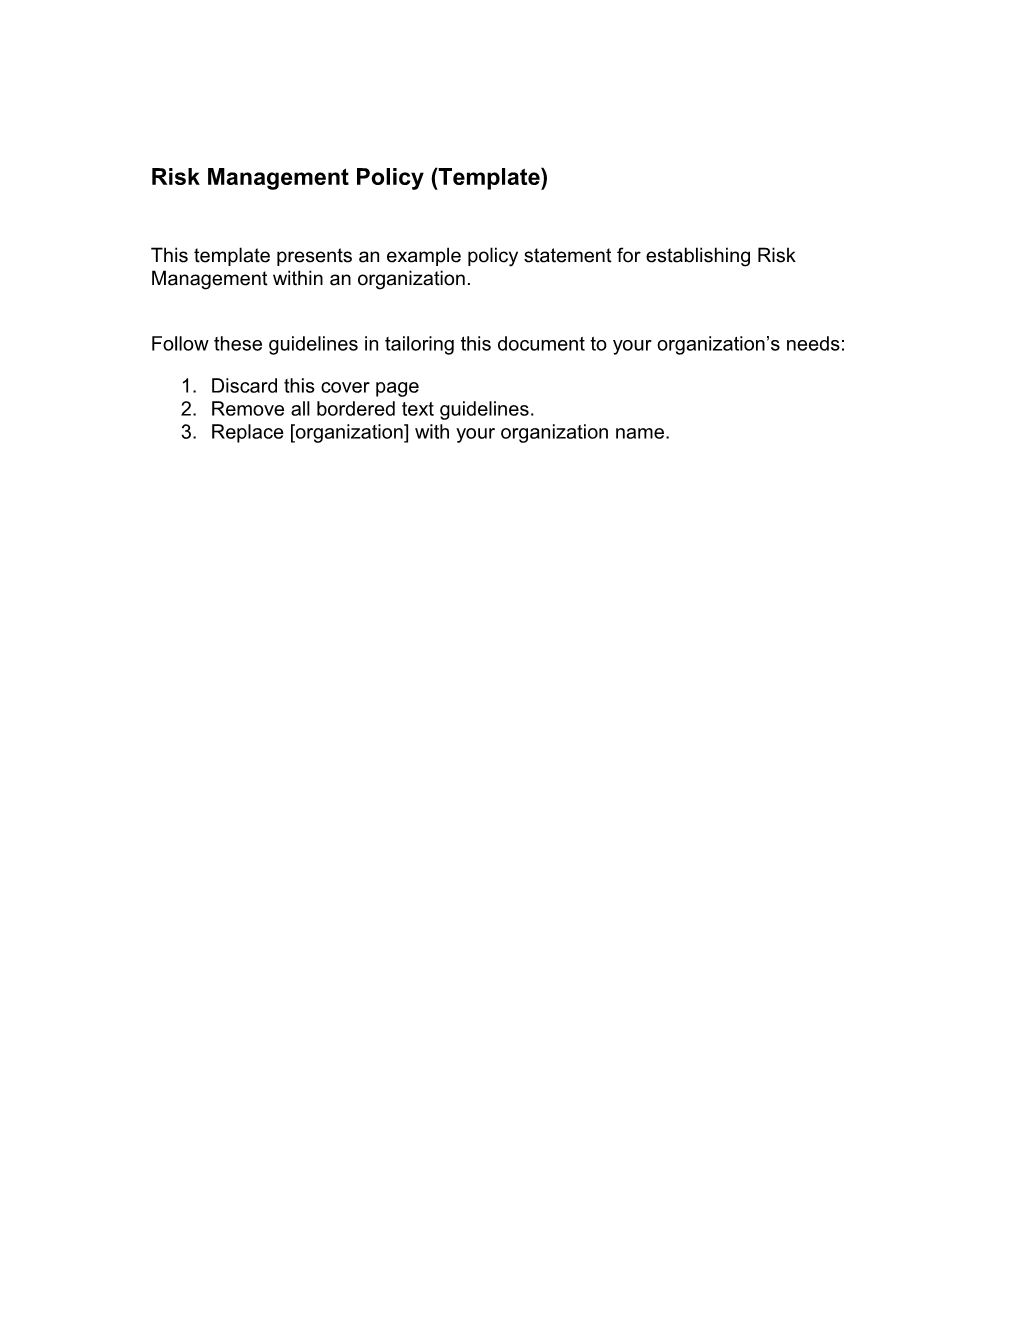 Risk Management Policy Statement